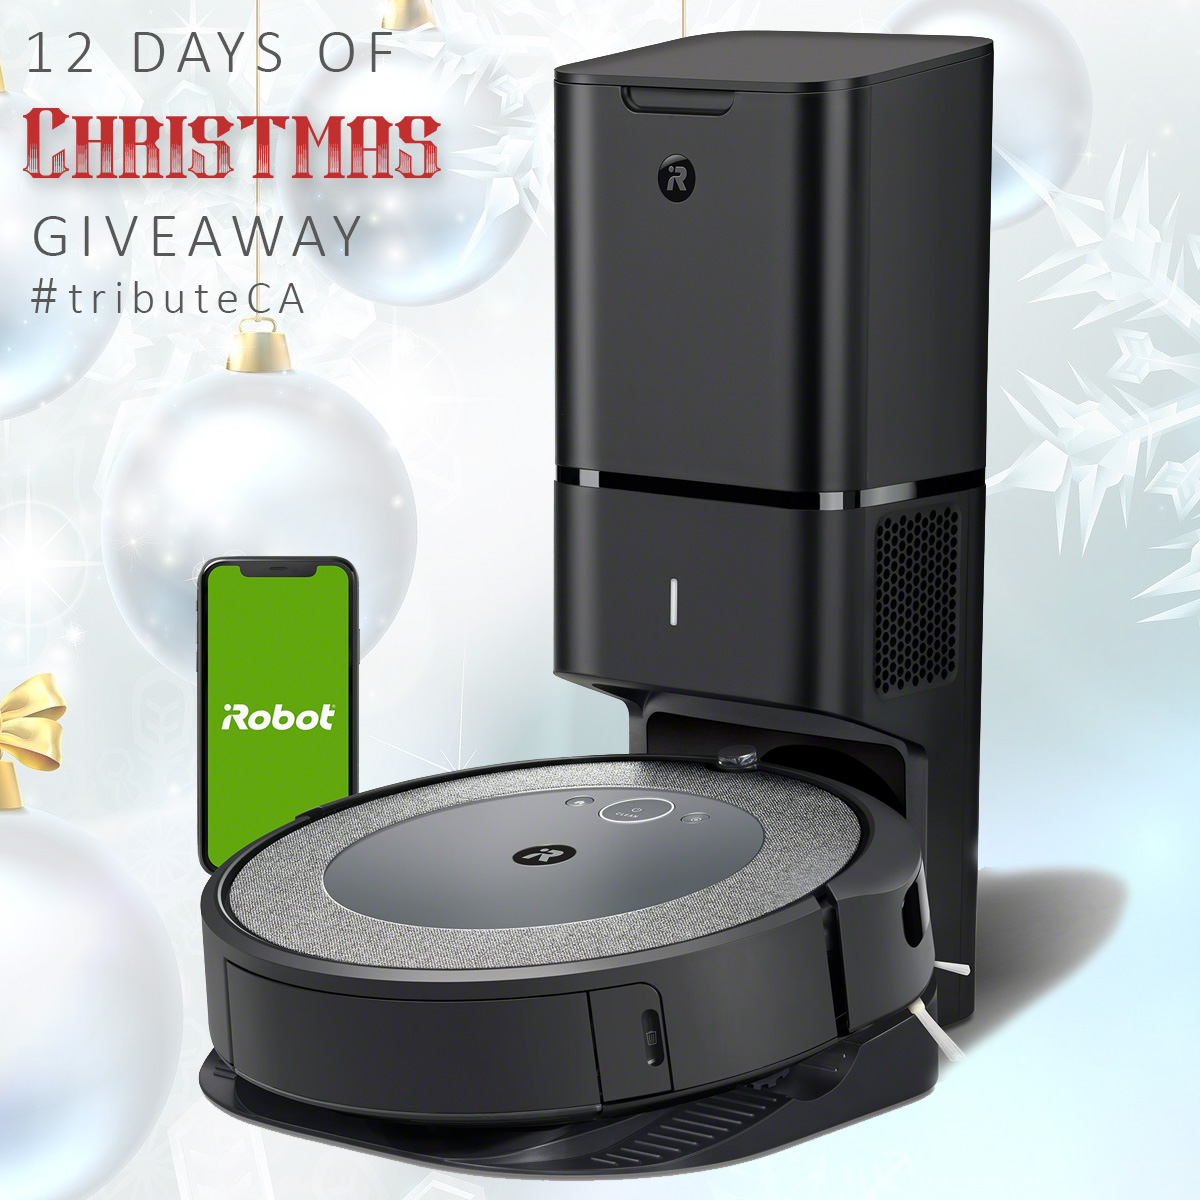 12 Days of Christmas giveaway: Day 1 – iRobot Roomba i3+, value $750 « Celebrity Gossip and ...